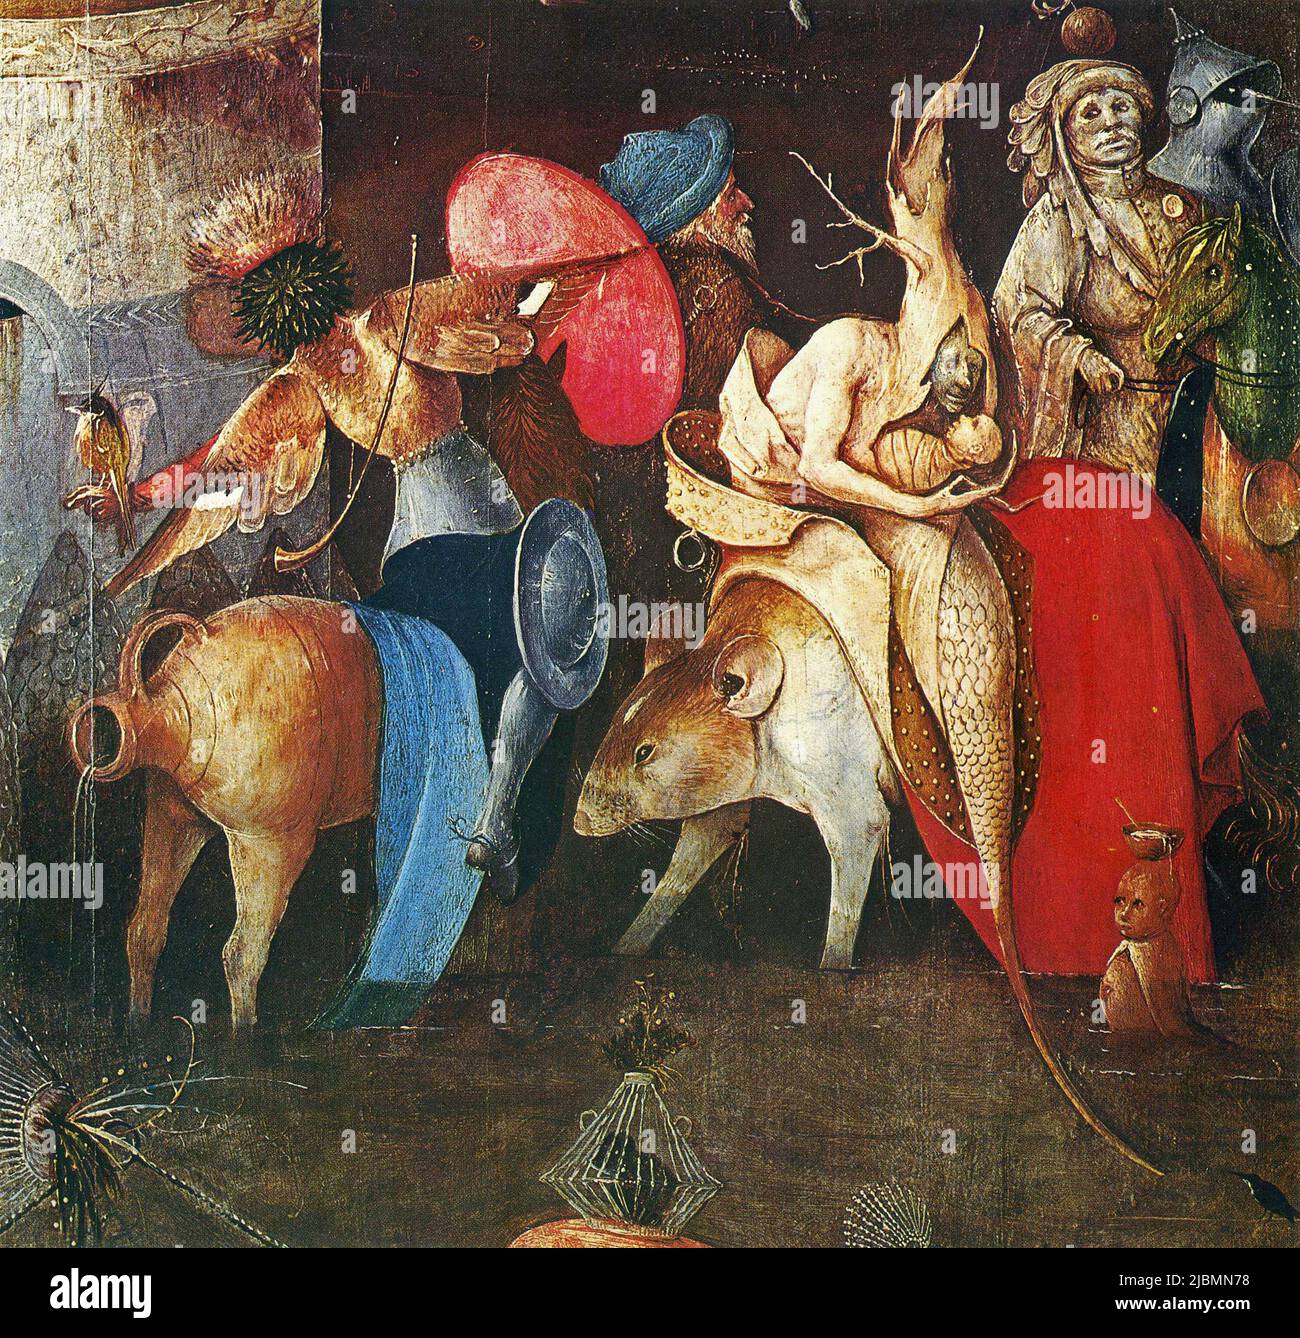 'The Temptation of St.Anthony', central panel of the triptych by Hieronymus Bosch. Lisbon, Museu Nacional de Arte Antiga. Stock Photo